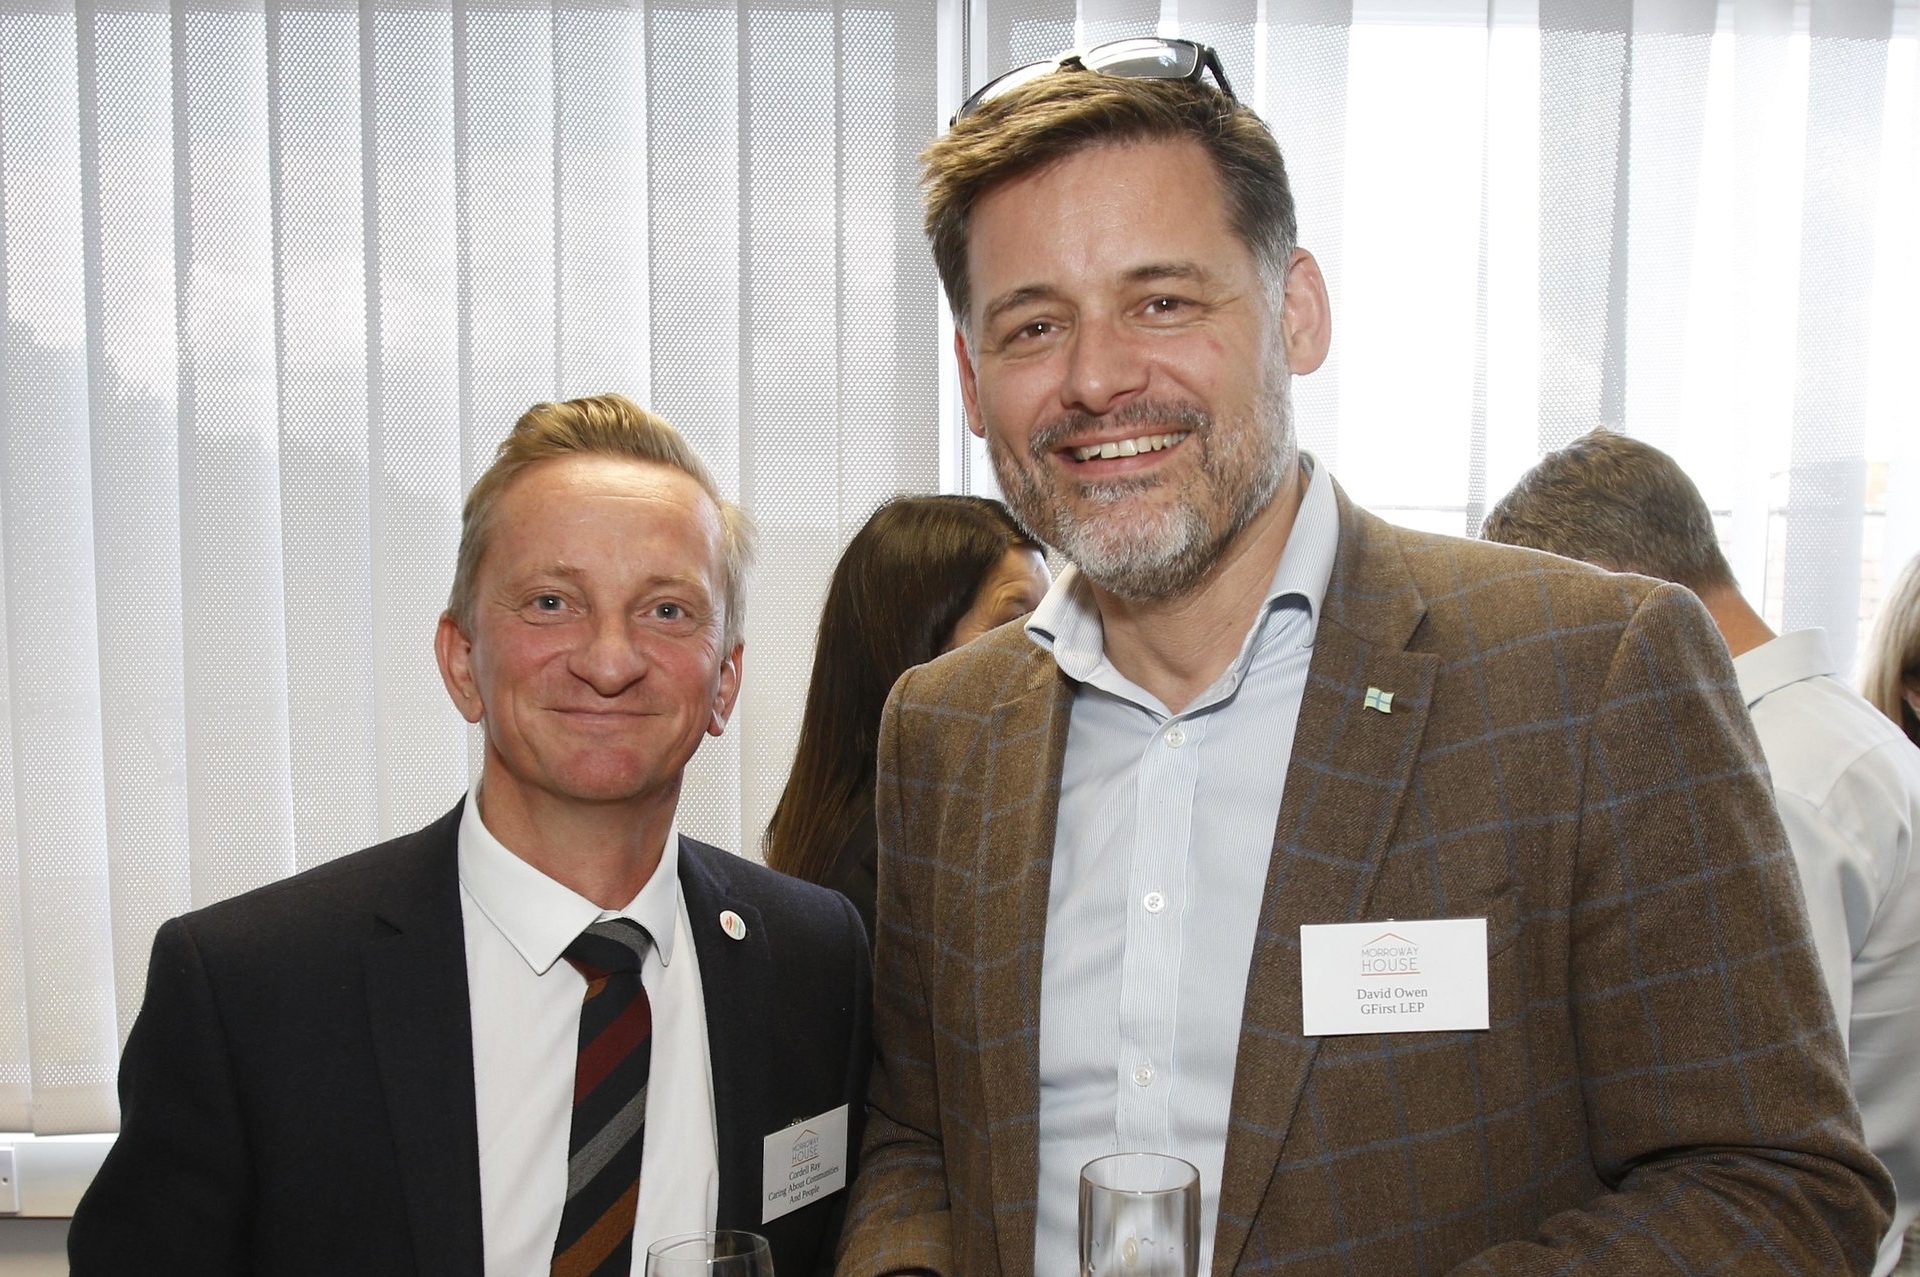 Cordell Ray from CCP charity, and David Owen from GFirst LEP, at the official opening of Morroway House, on Station Road, Gloucester, the community interest company providing office space for charities and good causes. 20 June 2019
Picture by Andrew Higgins/Thousand Word Media
 
NO SALES, NO SYNDICATION. Contact for more information mob: 07775556610 web: www.thousandwordmedia.com email: antony@thousandwordmedia.com

The photographic copyright (©2019) is exclusively retained by the works creator at all times and sales, syndication or offering the work for future publication to a third party without the photographer's knowledge or agreement is in breach of the Copyright Designs and Patents Act 1988, (Part 1, Section 4, 2b). Please contact the photographer should you have any questions with regard to the use of the attached work and any rights involved.